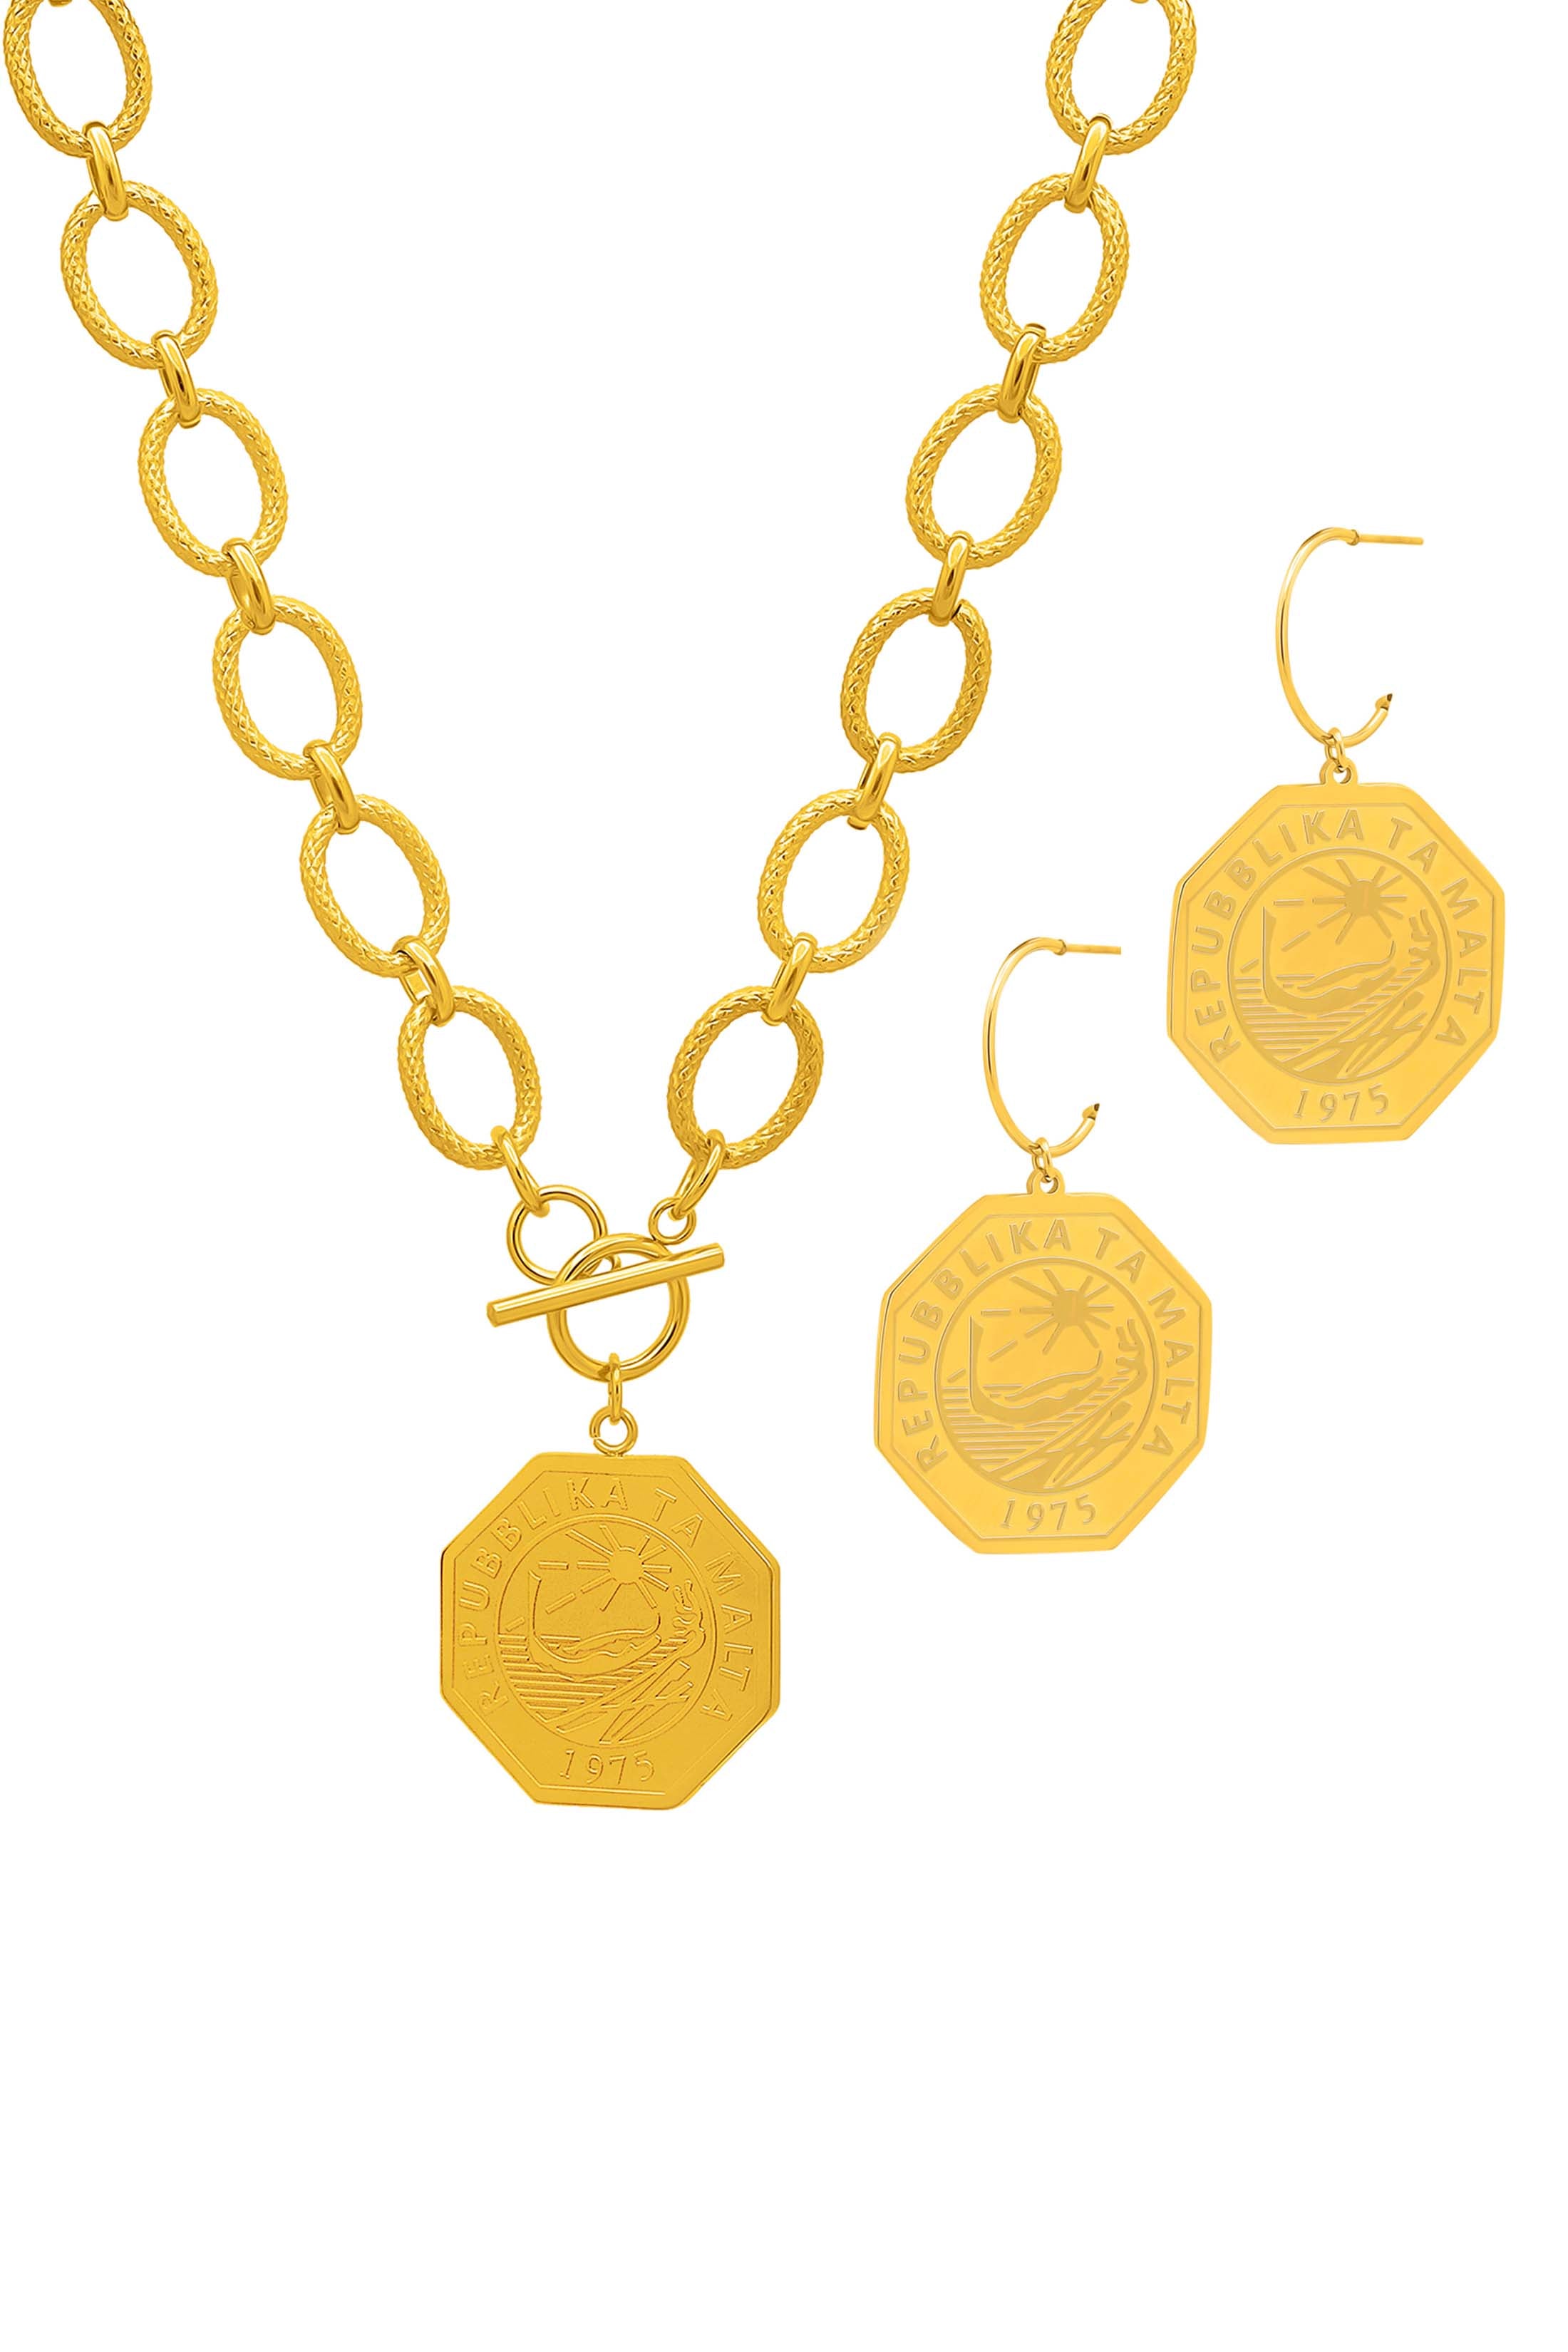 Octagon 25 Cent Luzzu Coin Pendant Chain Necklace &amp; Earring Set